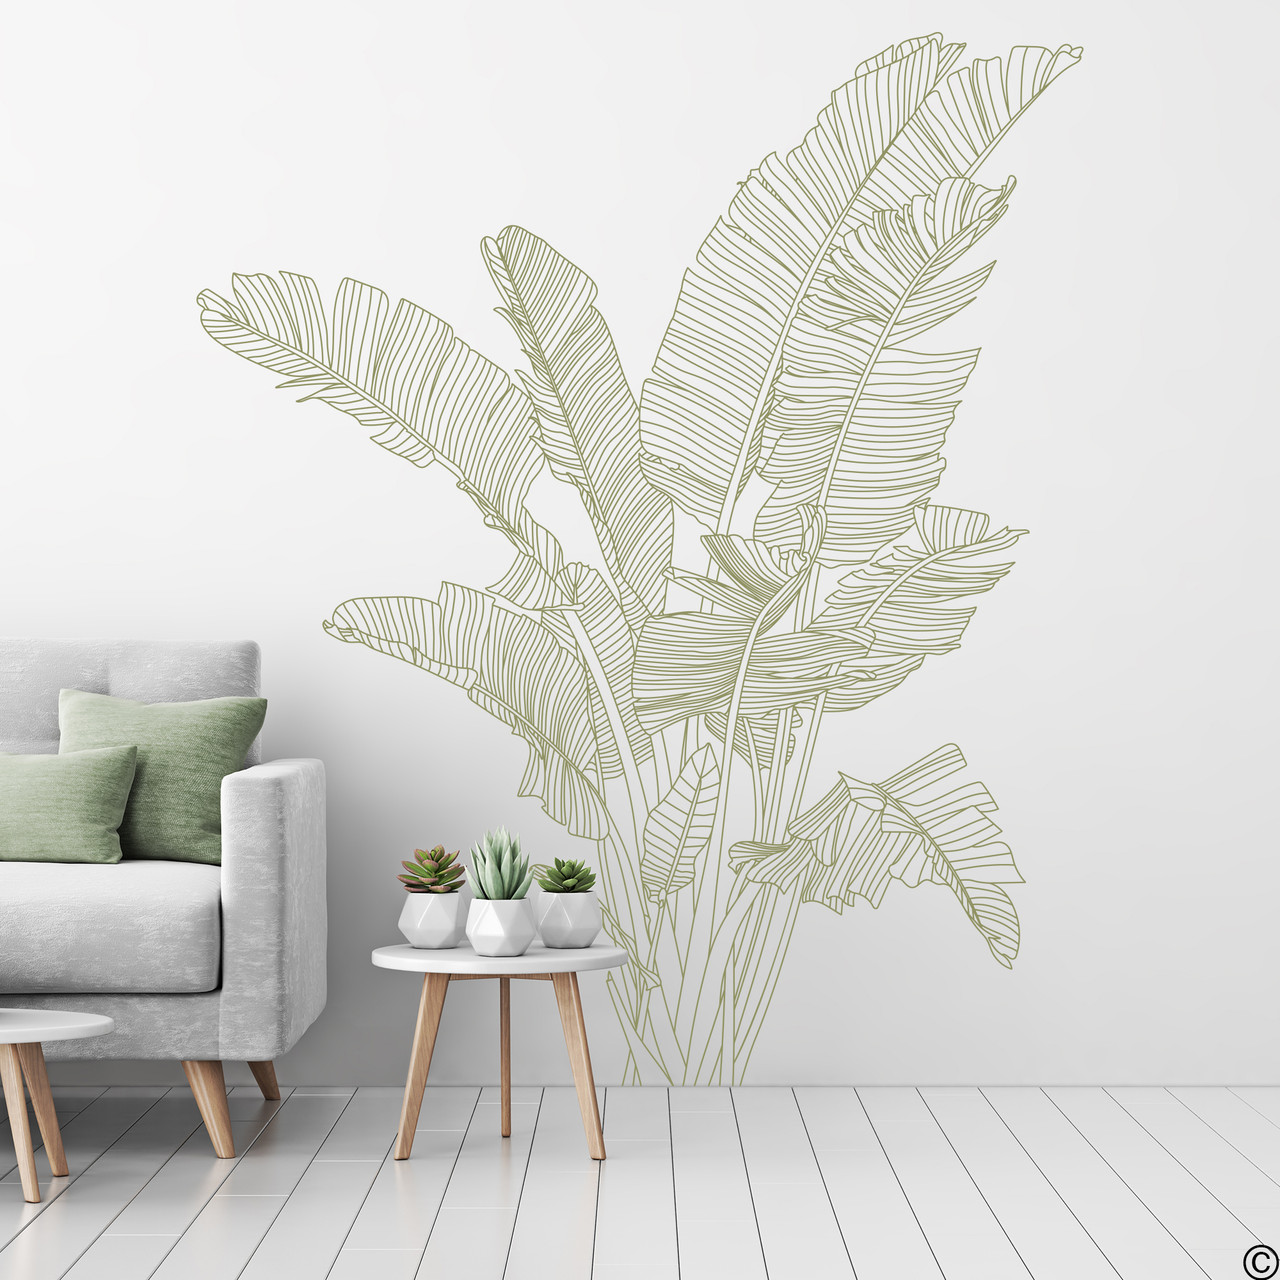 The Bird of Paradise wall decal shown here in celadon vinyl color on a living room wall.